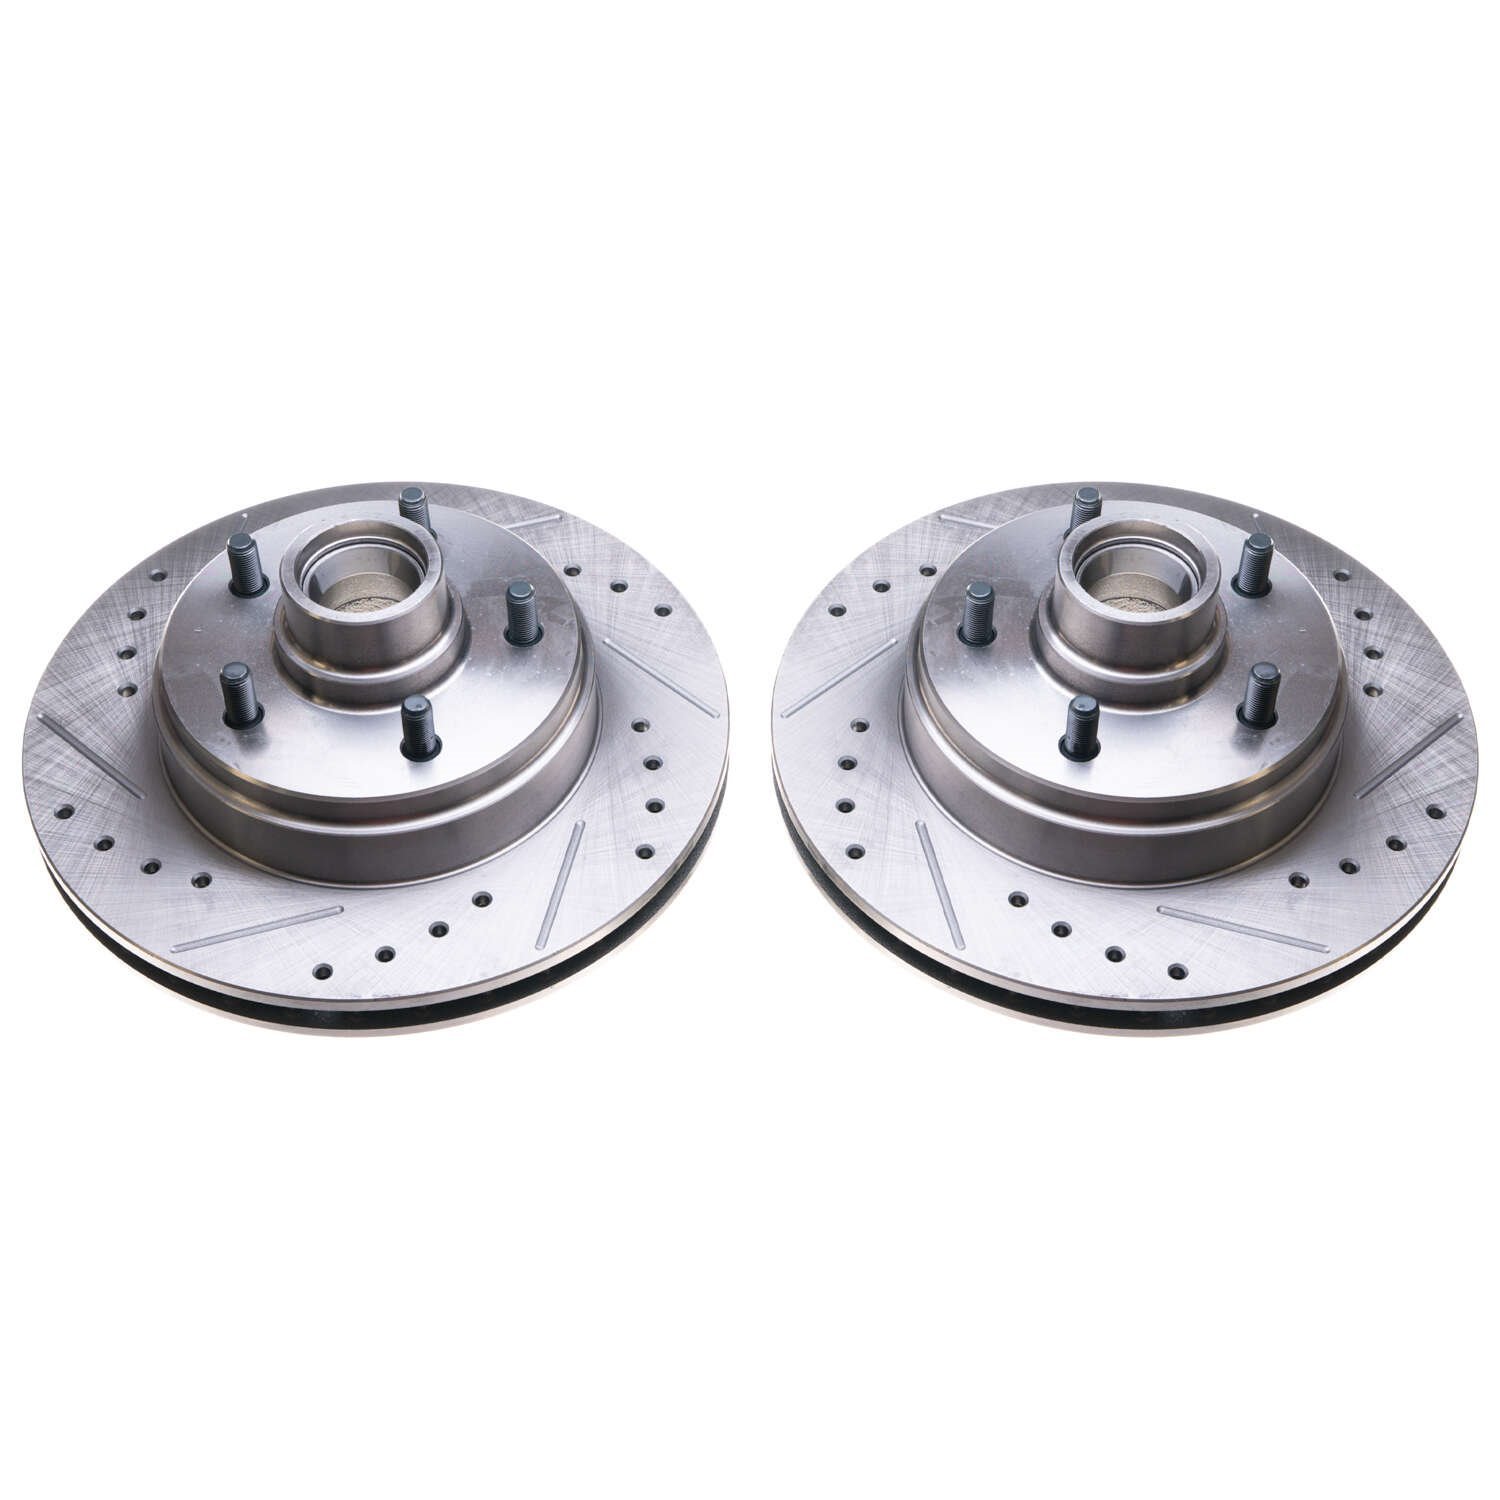 Drilled and Slotted Brake Rotors Fits Select 1977-1993 Chevrolet, GMC, Cadillac, Buick, Oldsmobile, Pontiac Models